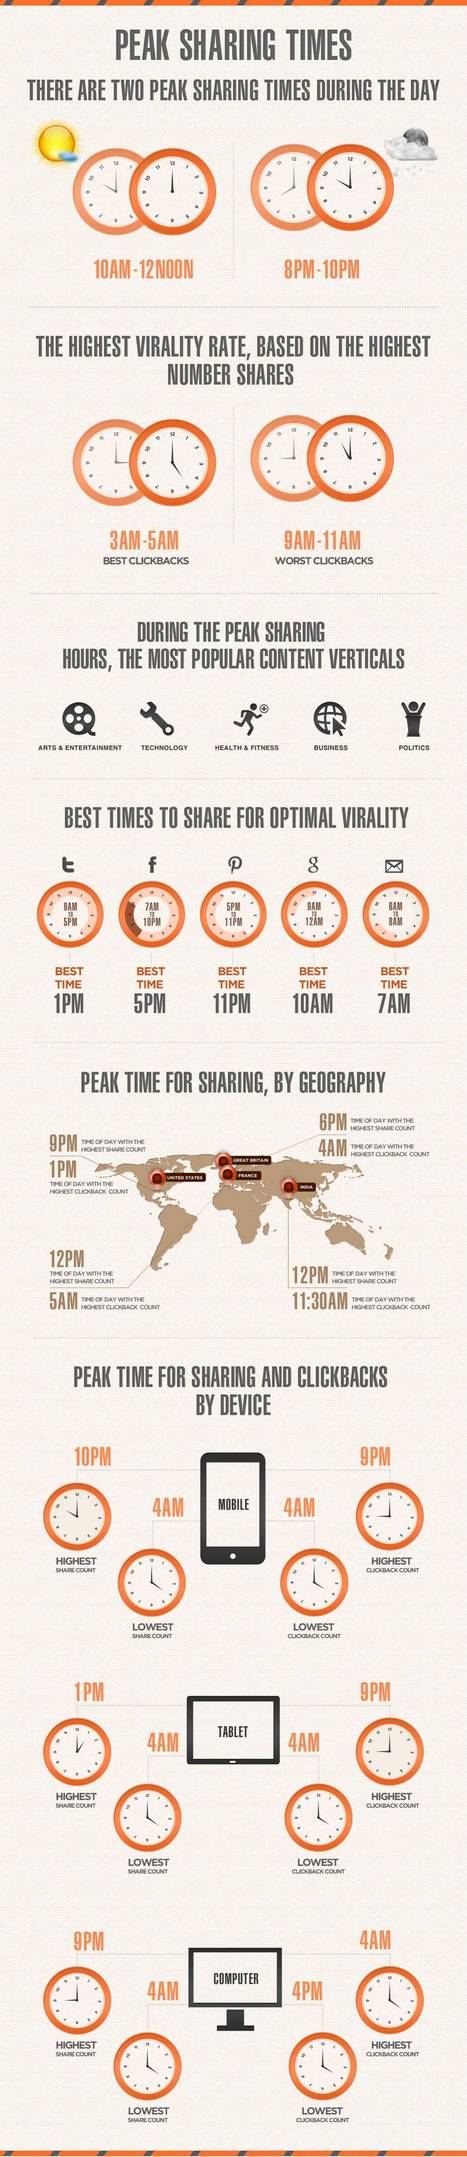 Best Time For Sharing Content [Infographic] | MarketingHits | Scoop.it